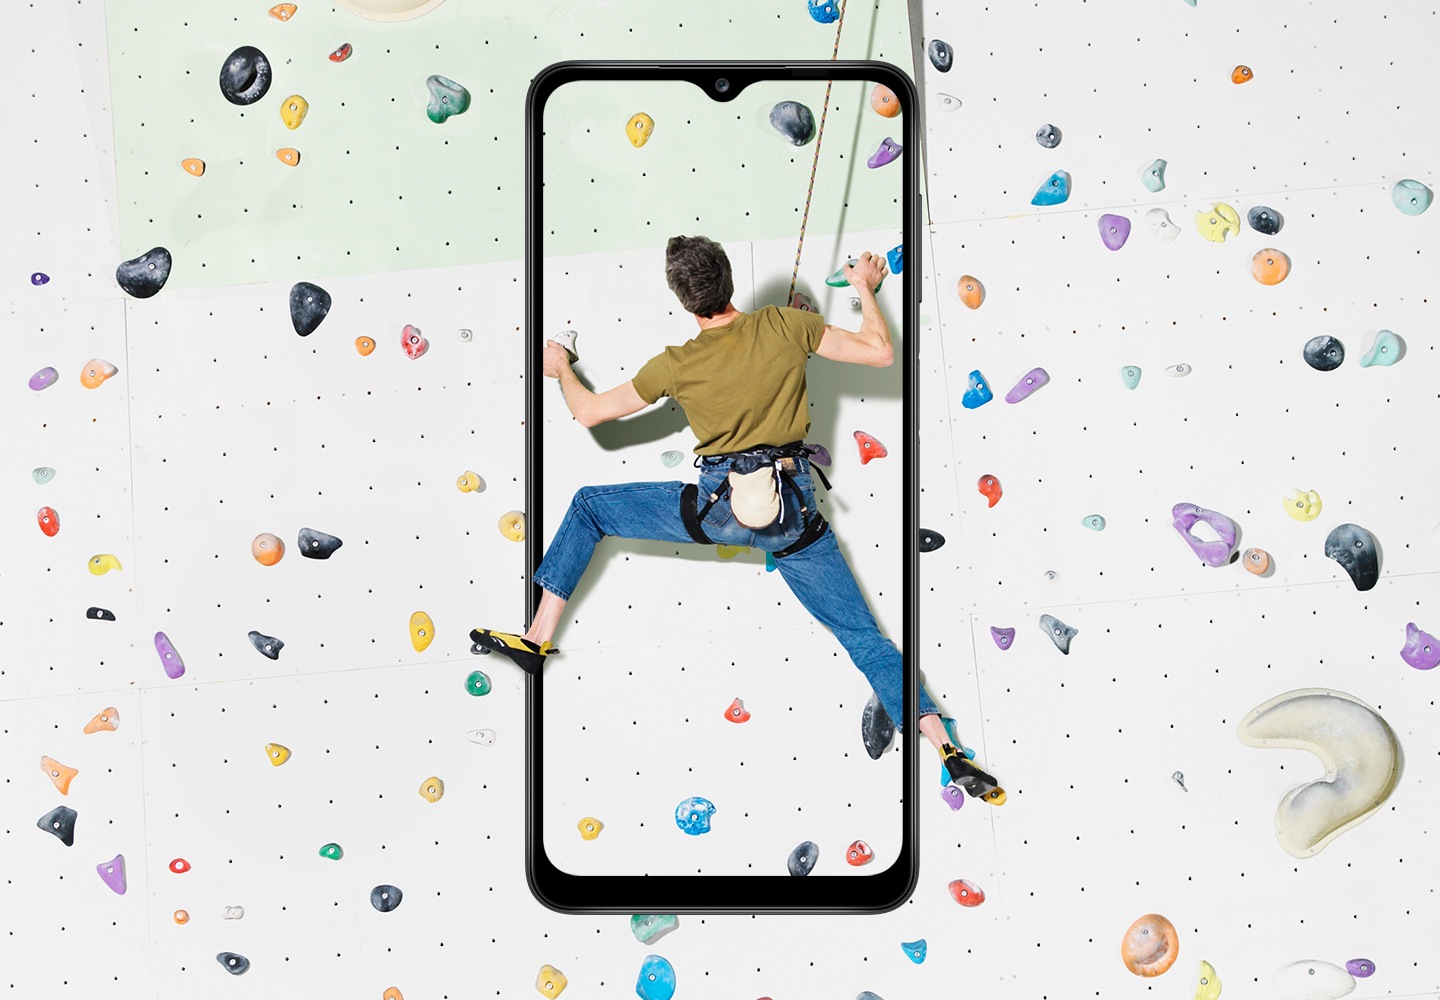 Check out Samsung Galaxy A12 review on specs, design, battery and more now. A guy climbing in motion captured in the Samsung Galaxy A12 display, utilizing 6.5 inch Infinity-V display feature.